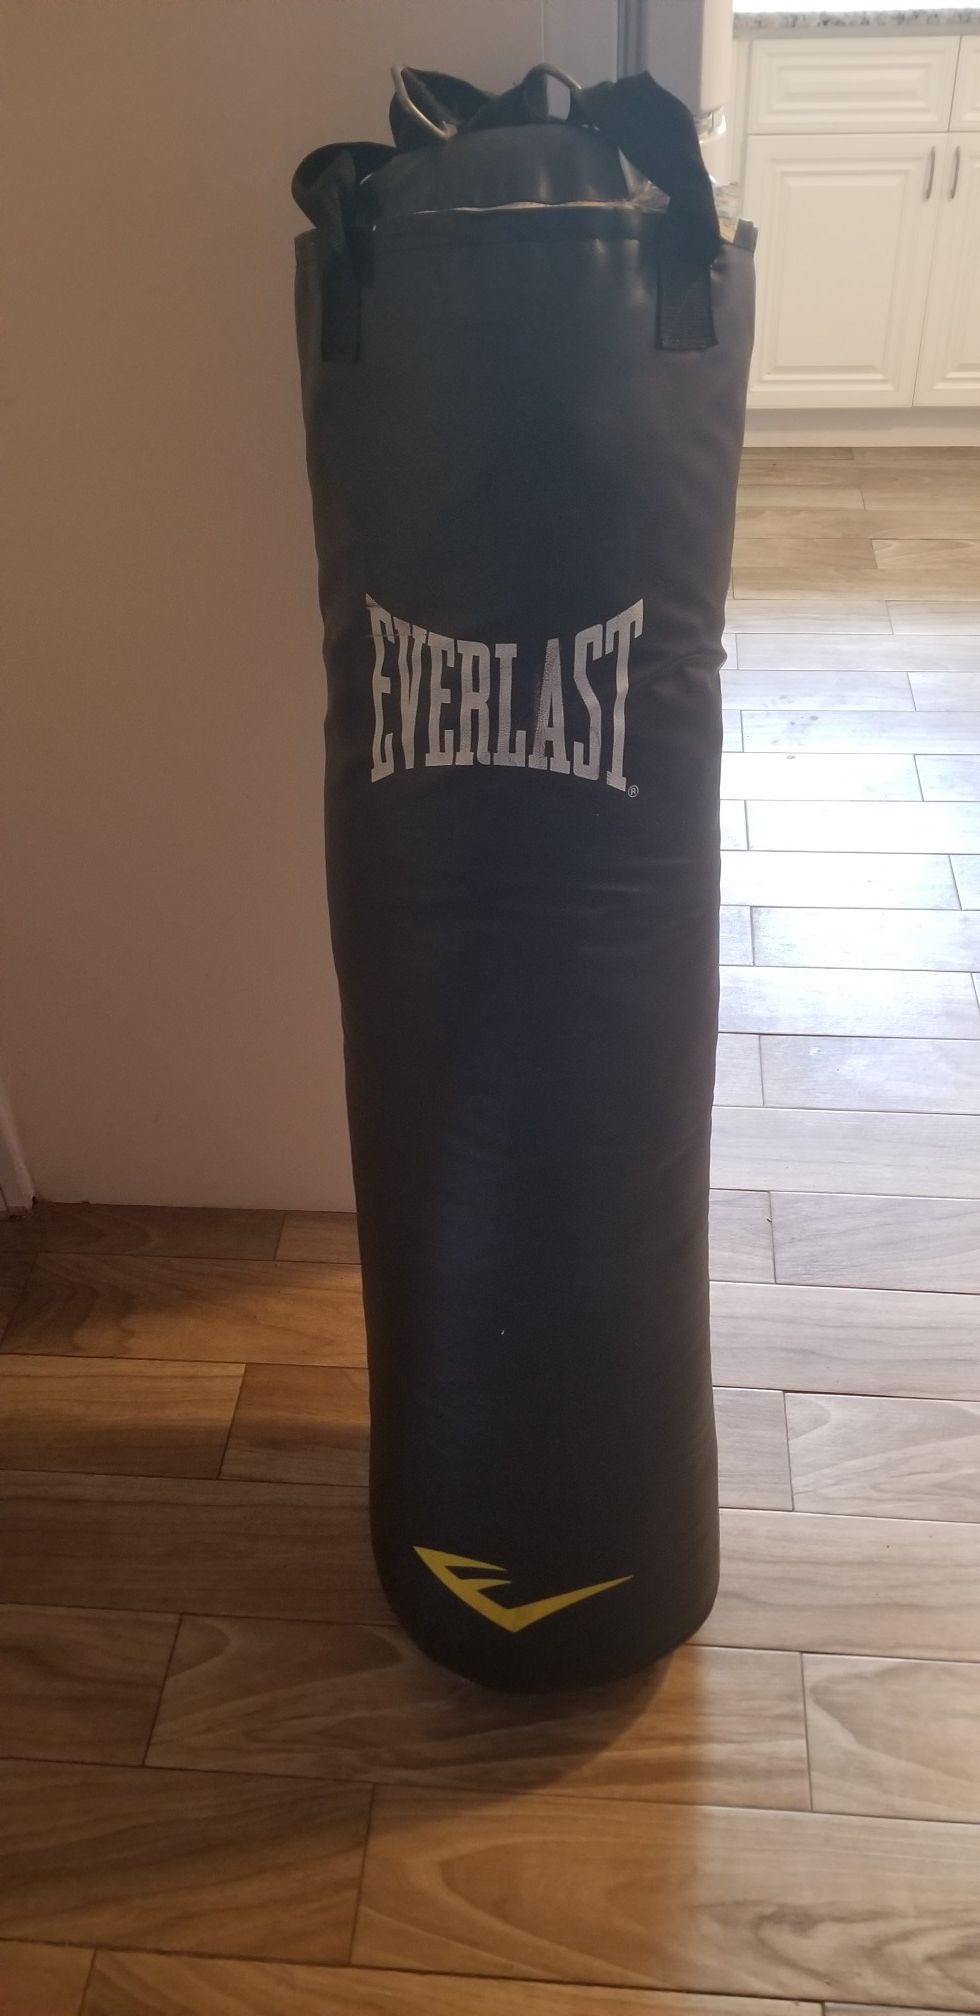 EVERLAST 100 lbs Heavy Boxing Punch Bag